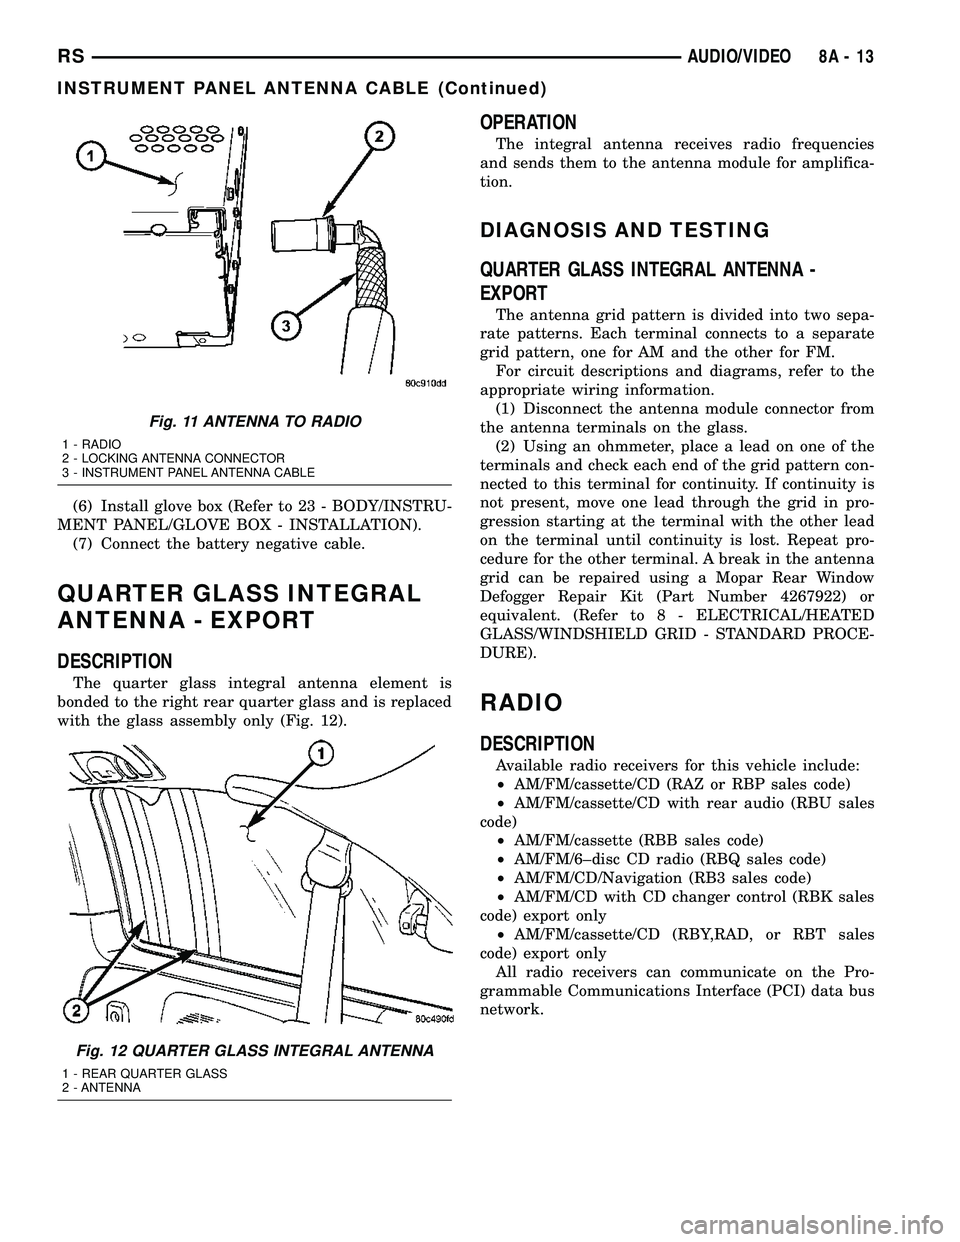 CHRYSLER CARAVAN 2005  Service Manual (6) Install glove box (Refer to 23 - BODY/INSTRU-
MENT PANEL/GLOVE BOX - INSTALLATION).
(7) Connect the battery negative cable.
QUARTER GLASS INTEGRAL
ANTENNA - EXPORT
DESCRIPTION
The quarter glass in